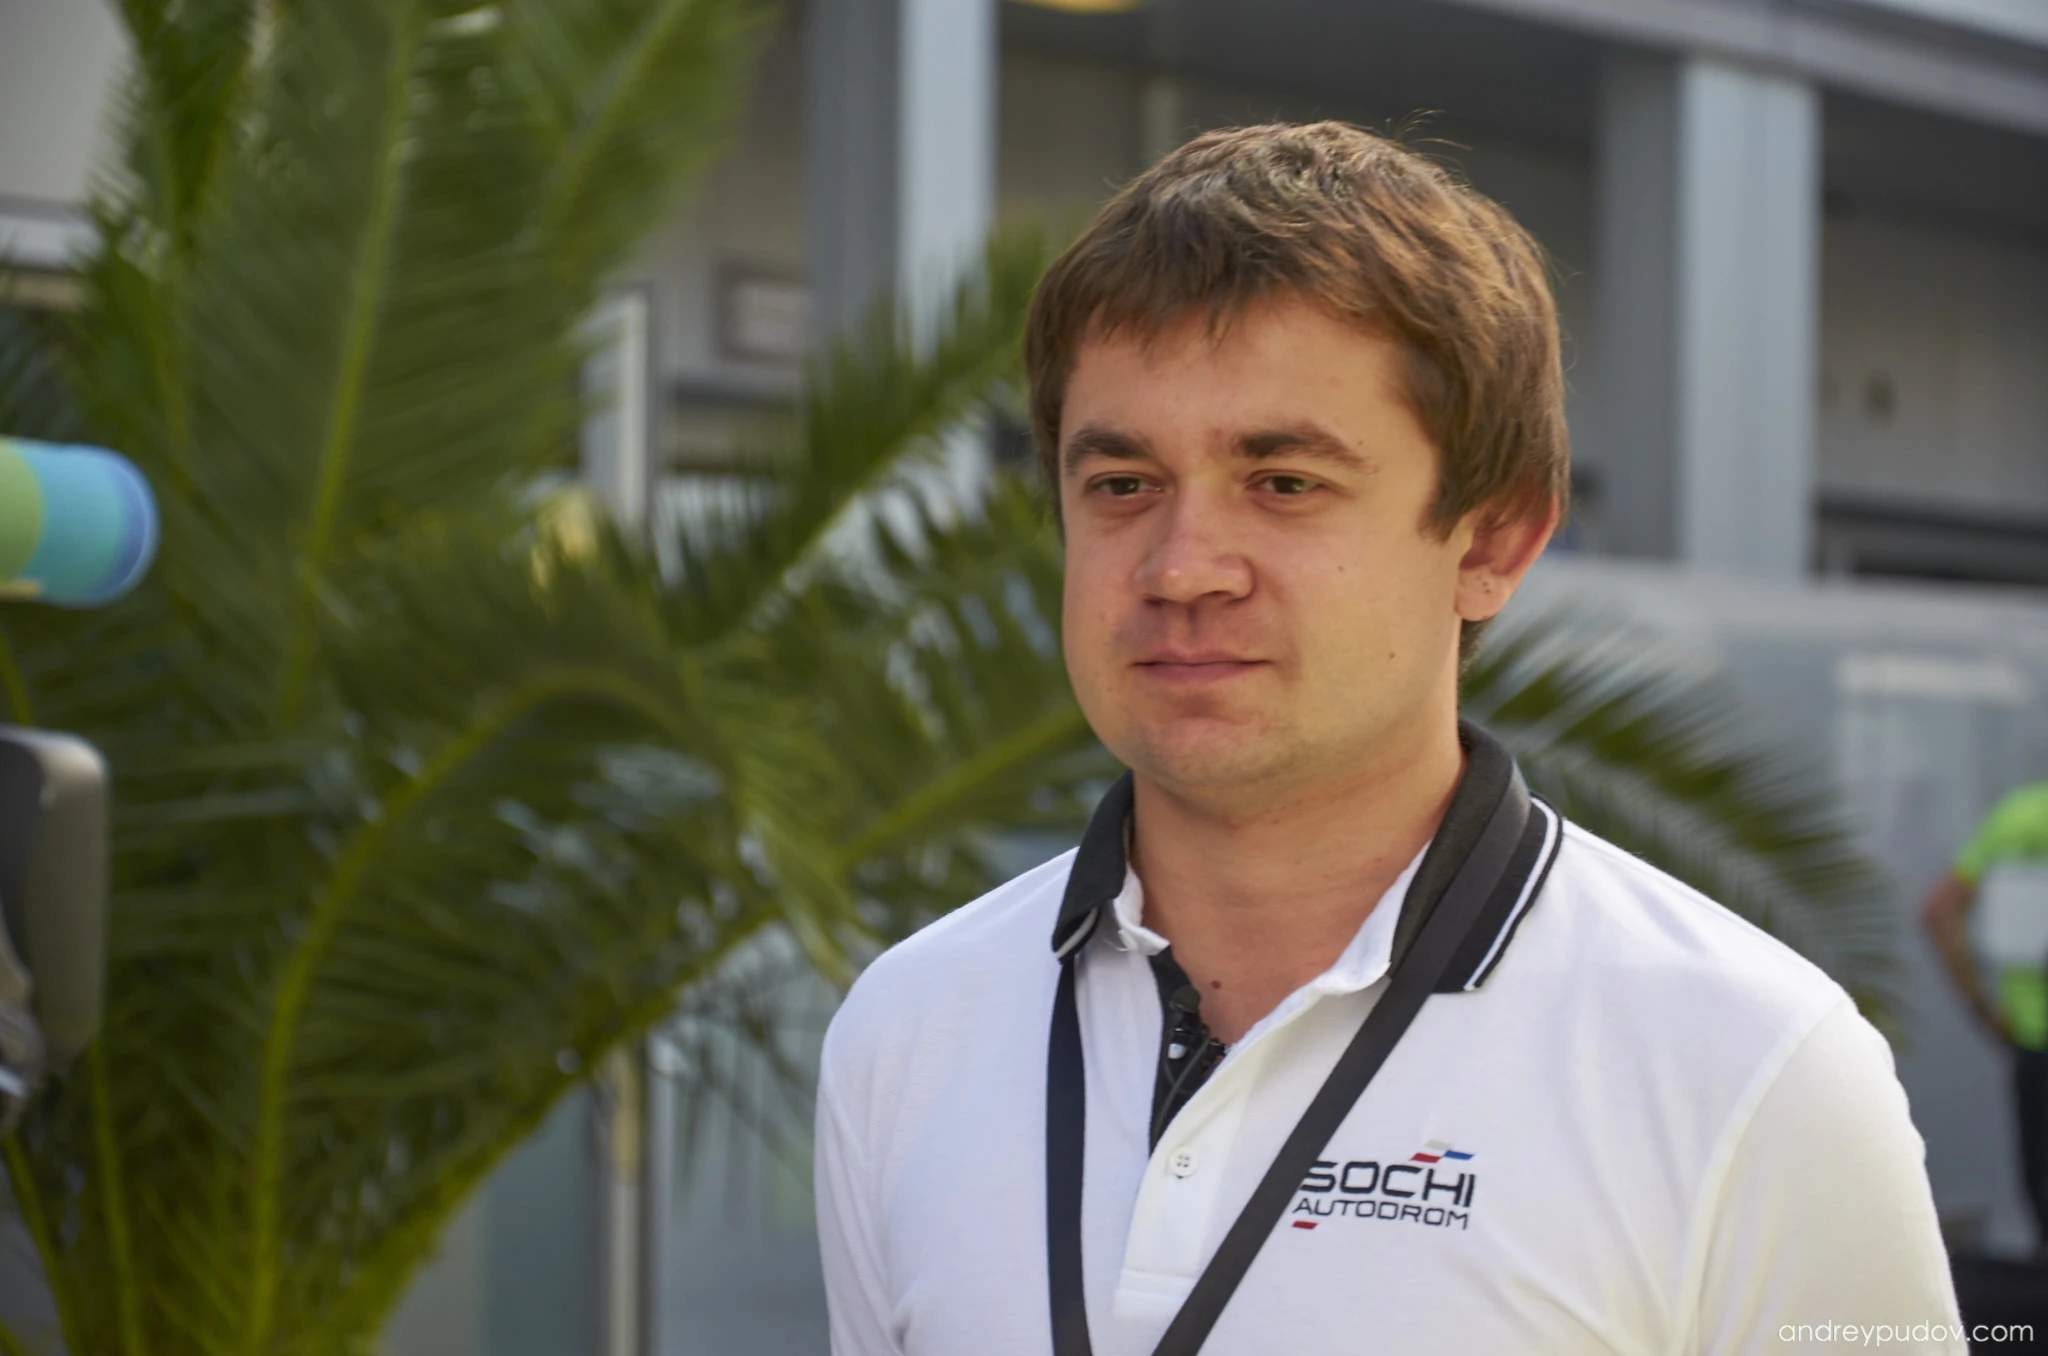 Sergey Vorobyev is the Russian Grand Prix promoter and Chief Executive Officer of Rosgonki.